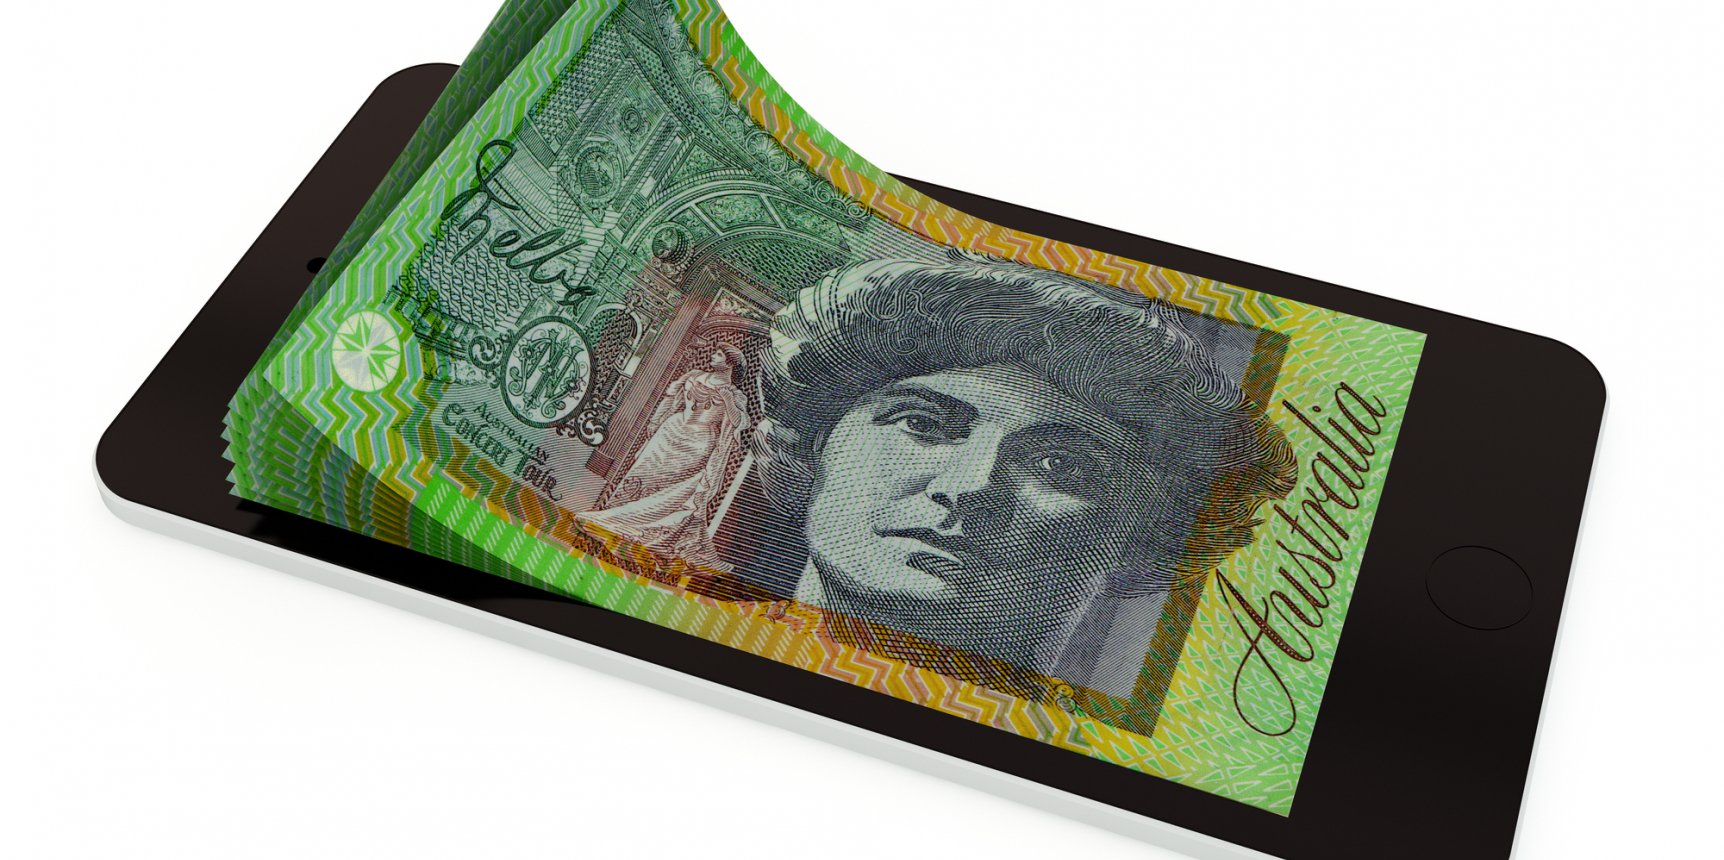 Here’s fintech’s secret pitch to the RBA to create an Australian dollar cryptocurrency